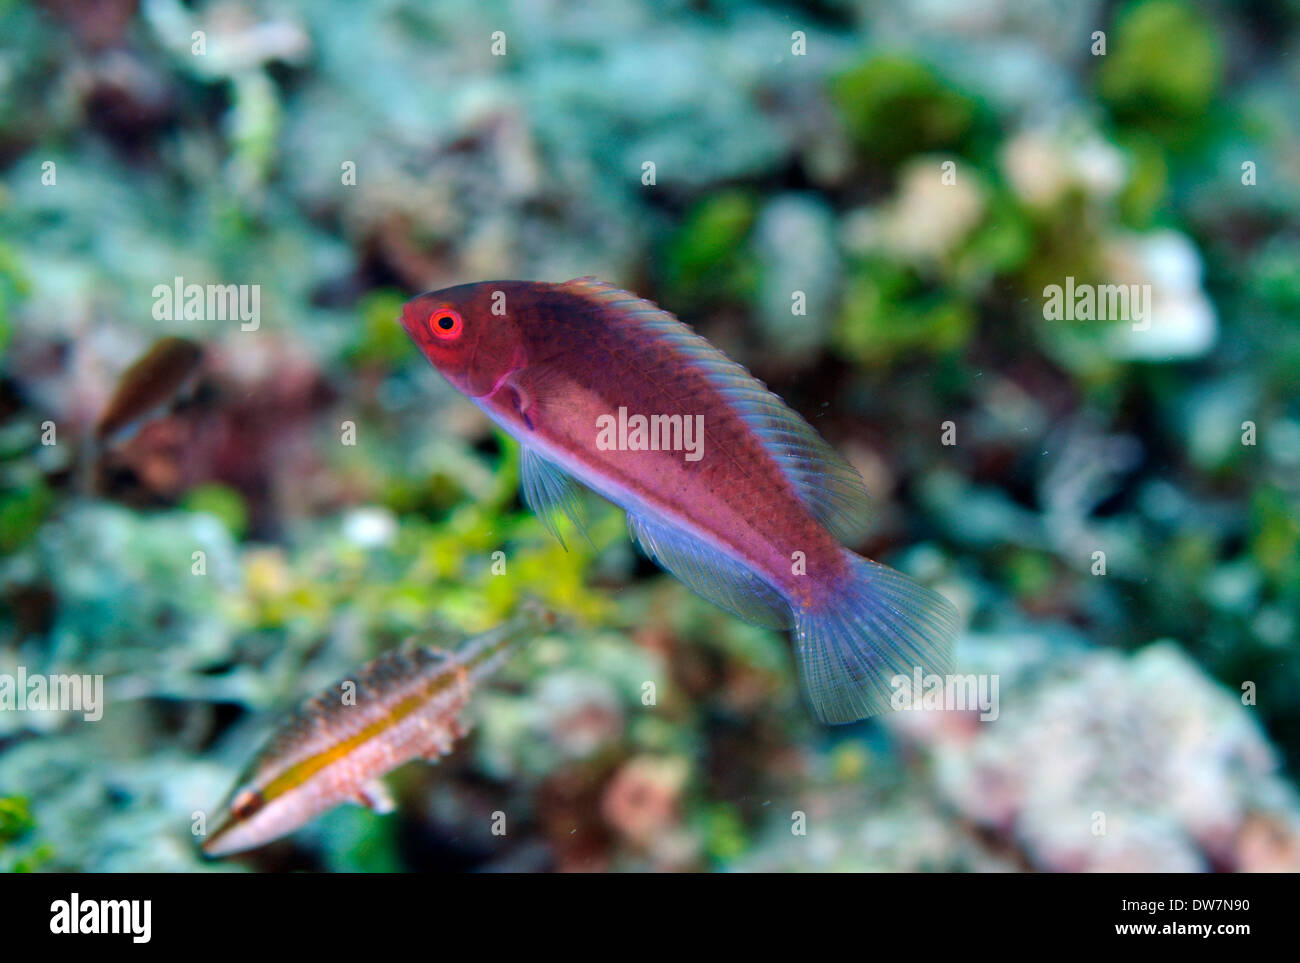 Yellowband wrasse, Labridae, Cirrhilabrus sp., Pohnpei, Federated States of Micronesia, North Pacific Stock Photo